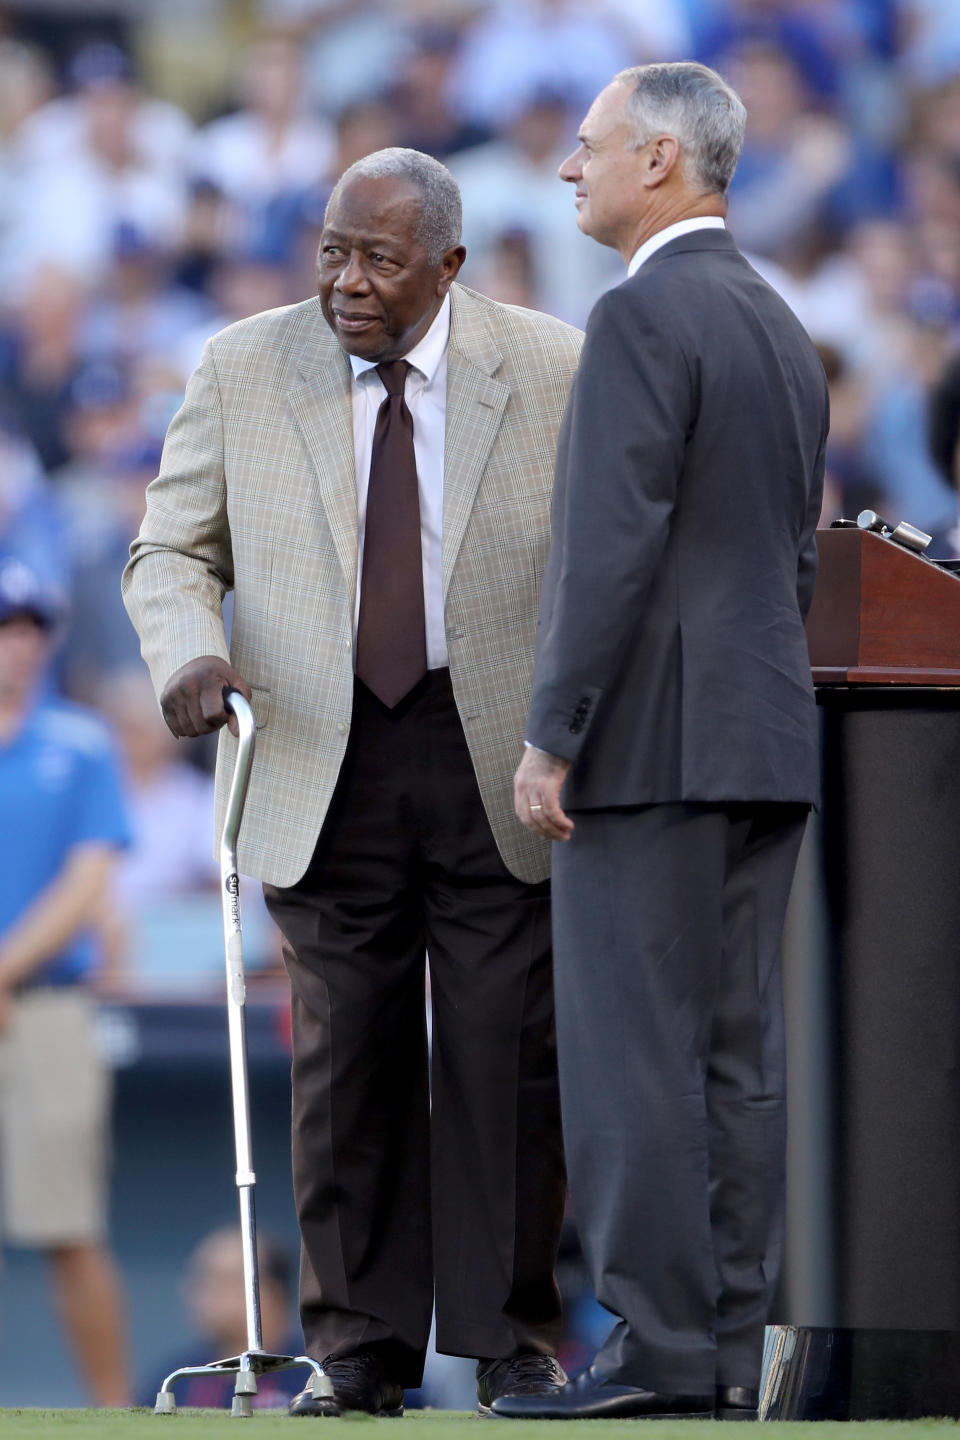 <p>Baseball Hall of Famer Hank Aaron stands with Major League Baseball Commissioner Robert D. Manfred Jr. before game two of the 2017 World Series between the Houston Astros and the Los Angeles Dodgers at Dodger Stadium on October 25, 2017 in Los Angeles, California. (Photo by Christian Petersen/Getty Images) </p>